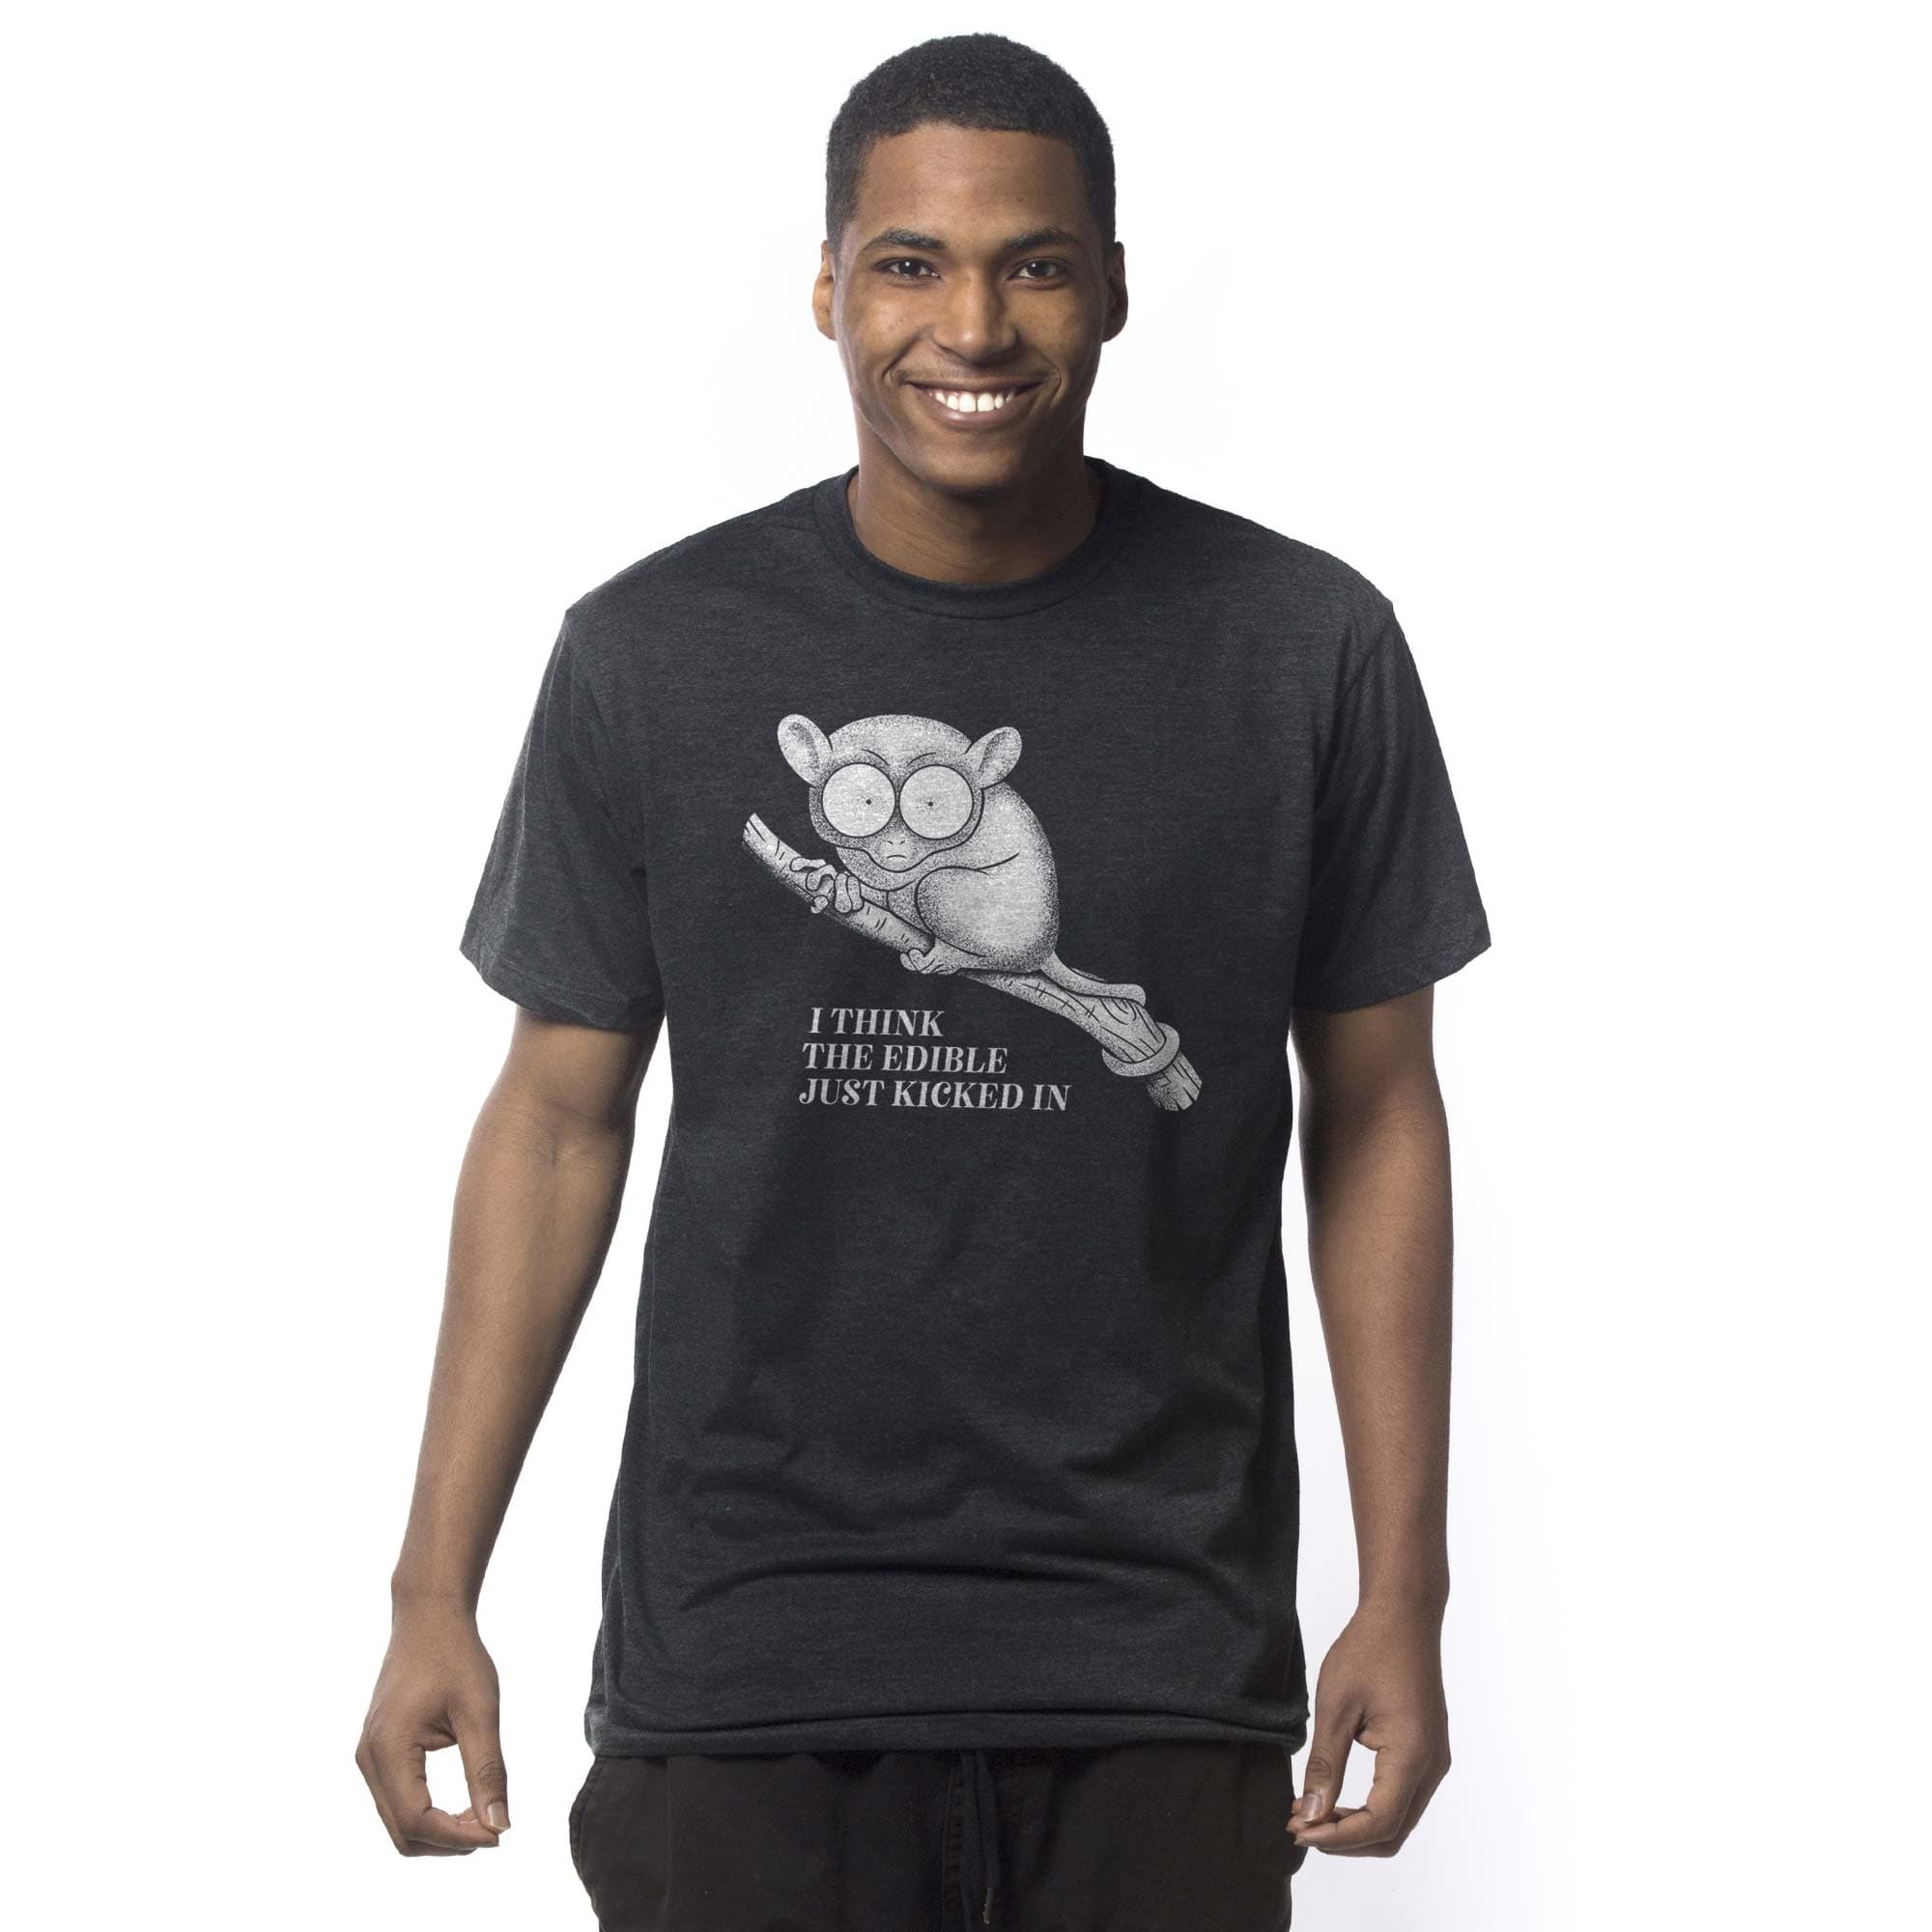 Men's Edible Kicked In Funny Graphic T-Shirt | Cool Tarsier Eyes Tree Tee On Model | Solid Threads